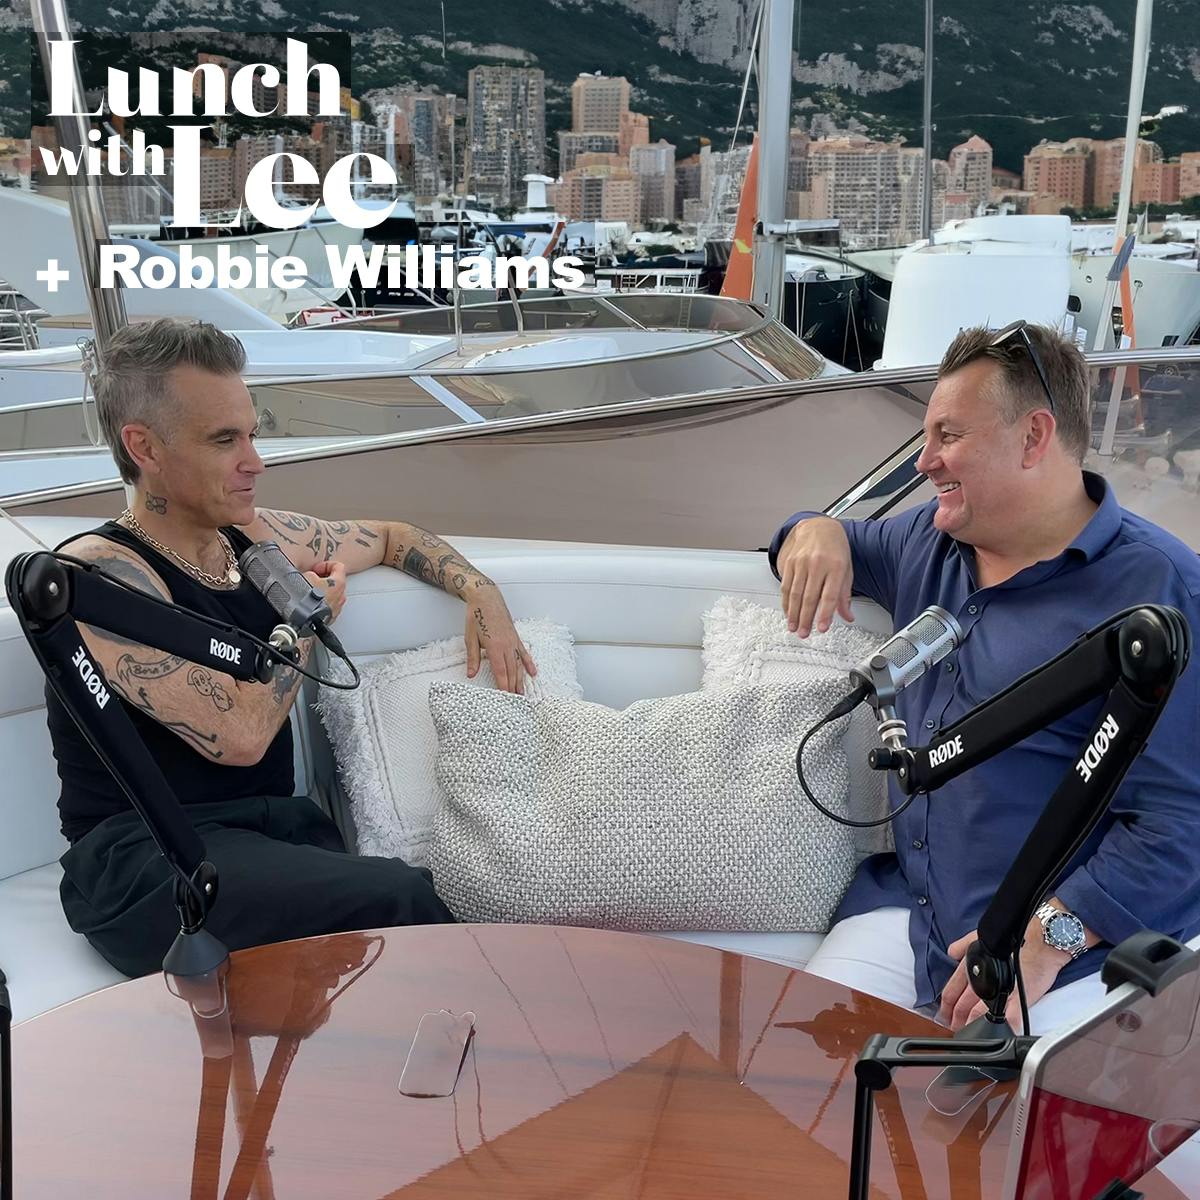 Lunch with Robbie Williams